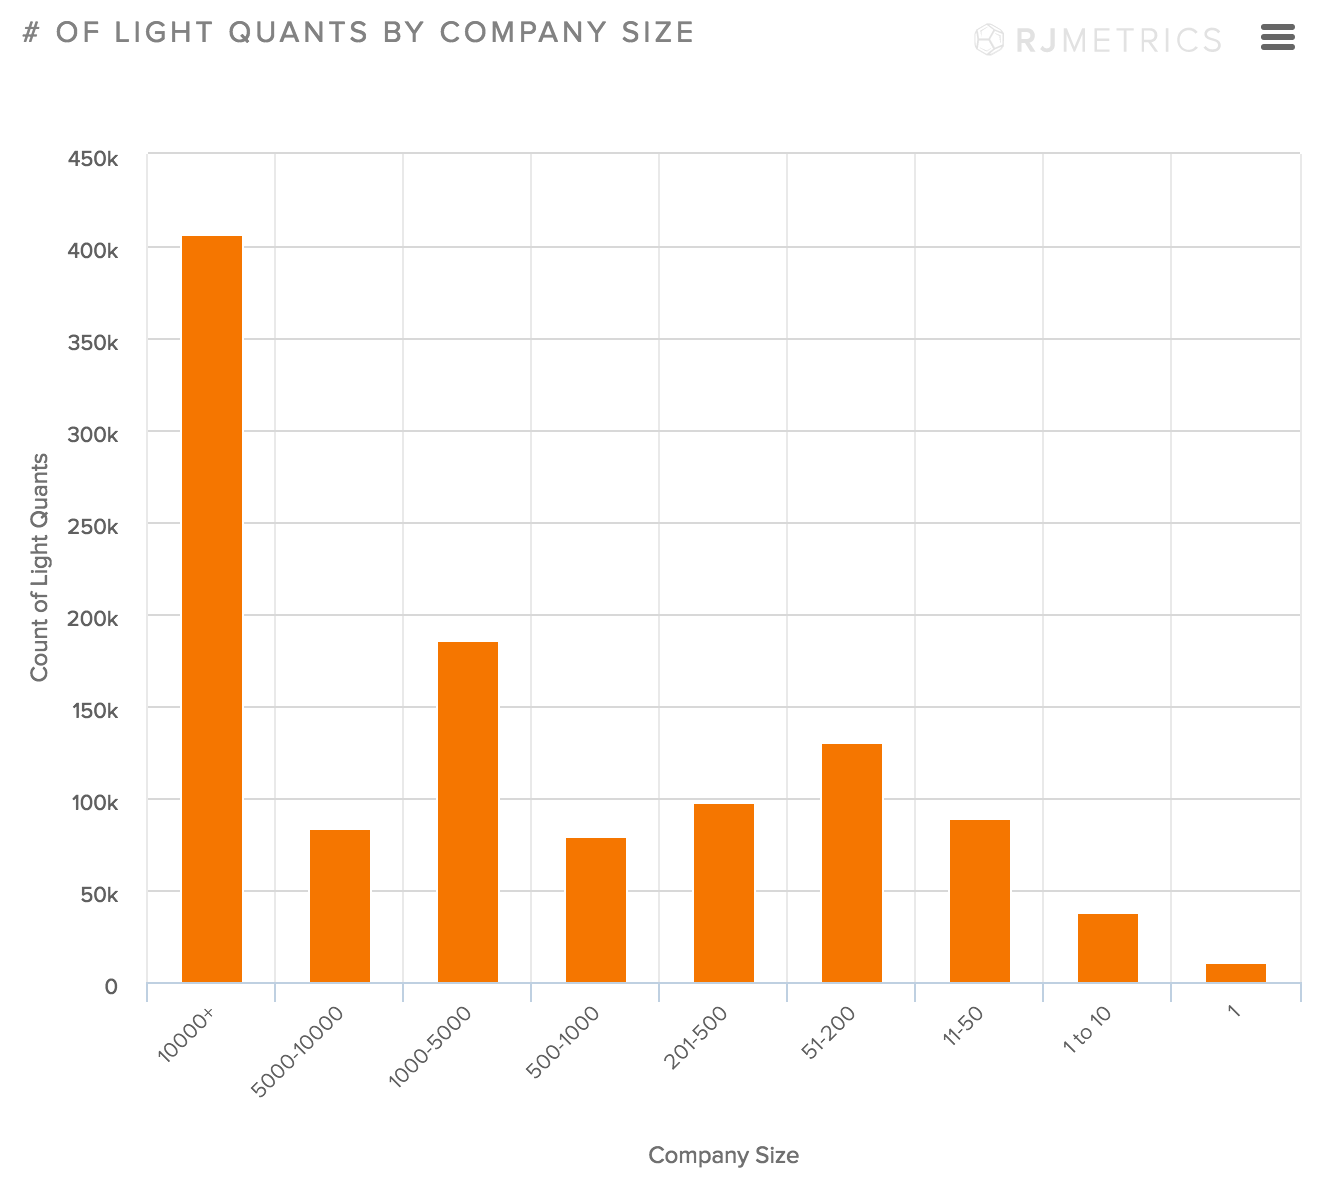 Light quants by company size